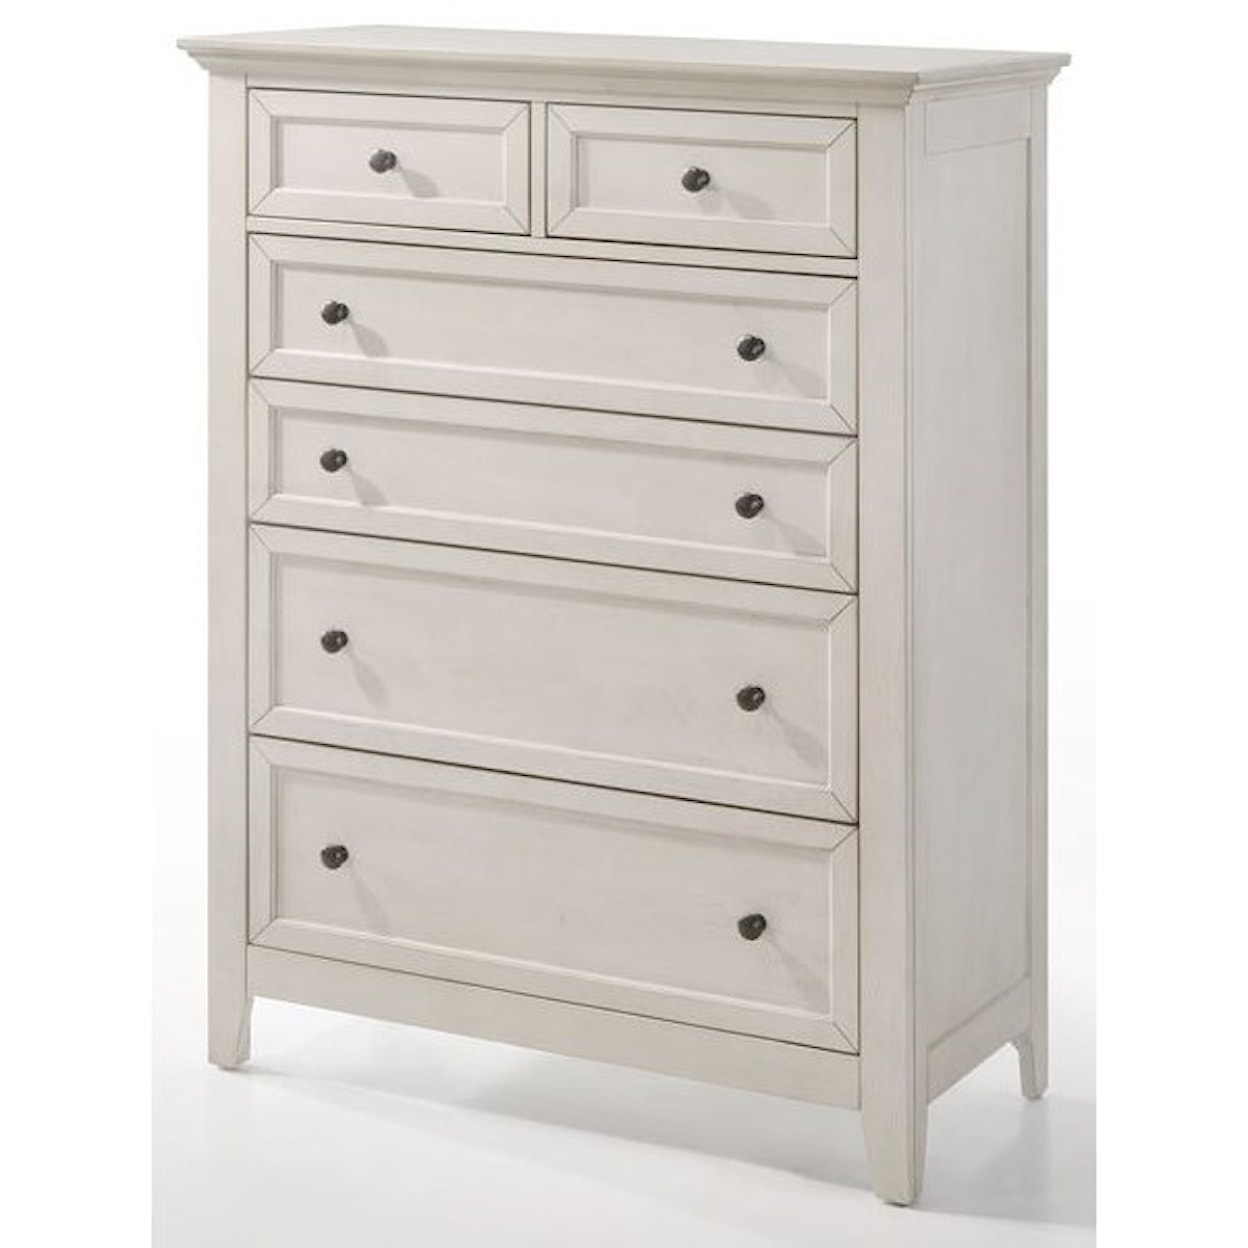 Belfort Select Mill Run Chest of Drawers